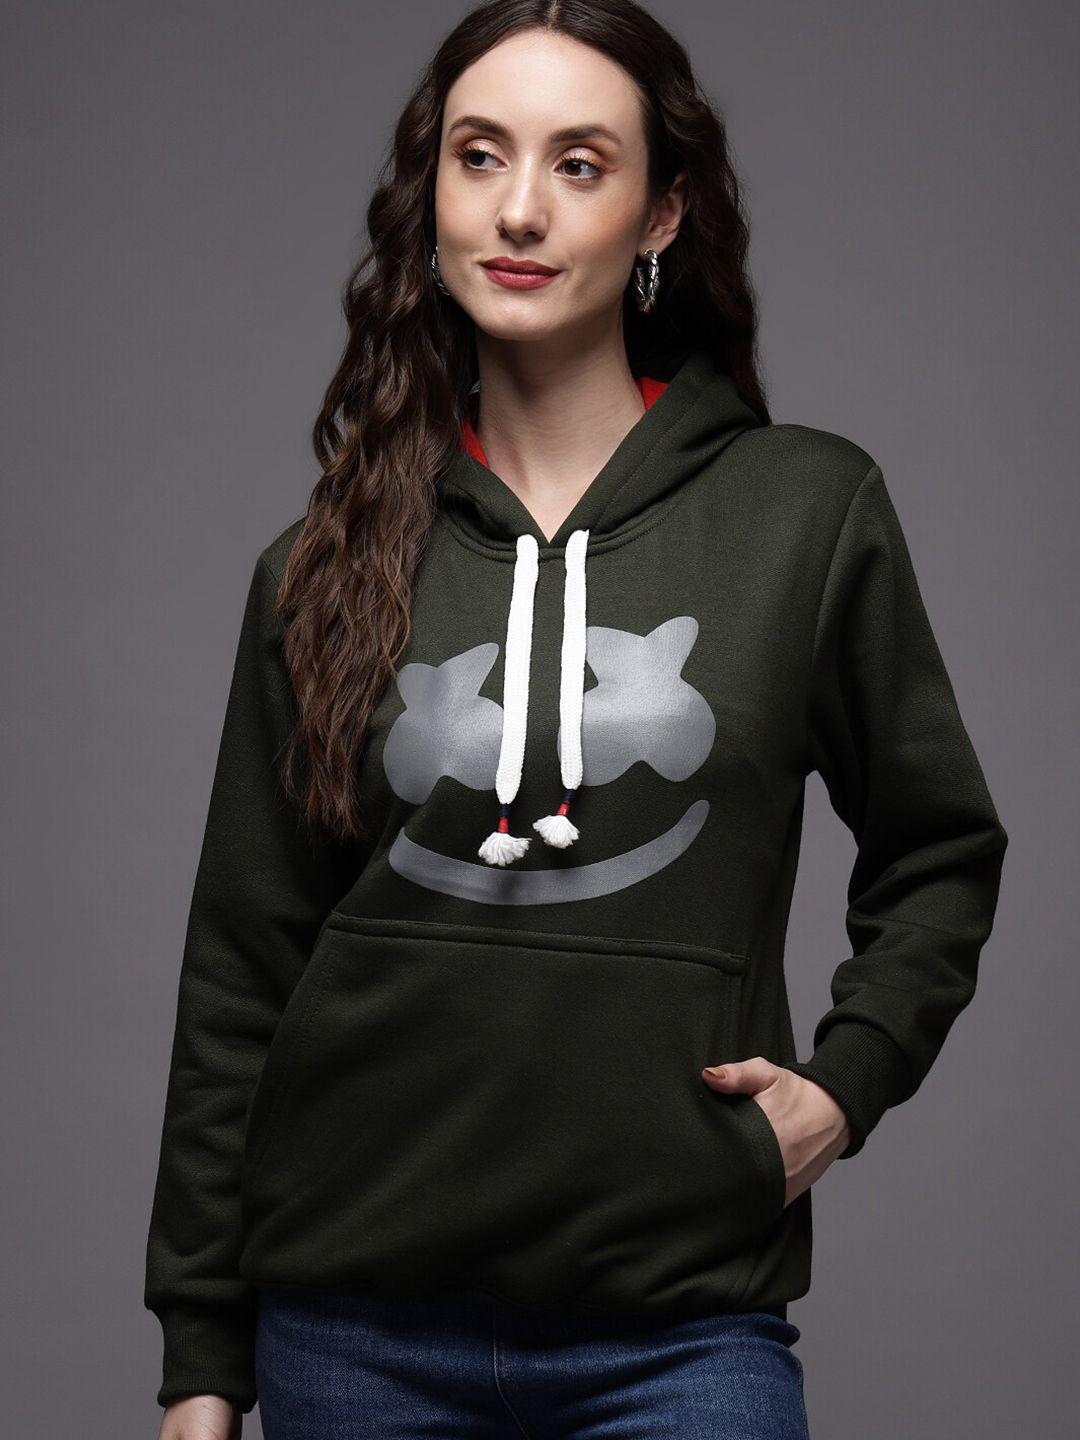 ewools graphic printed hooded terry pullover sweatshirt